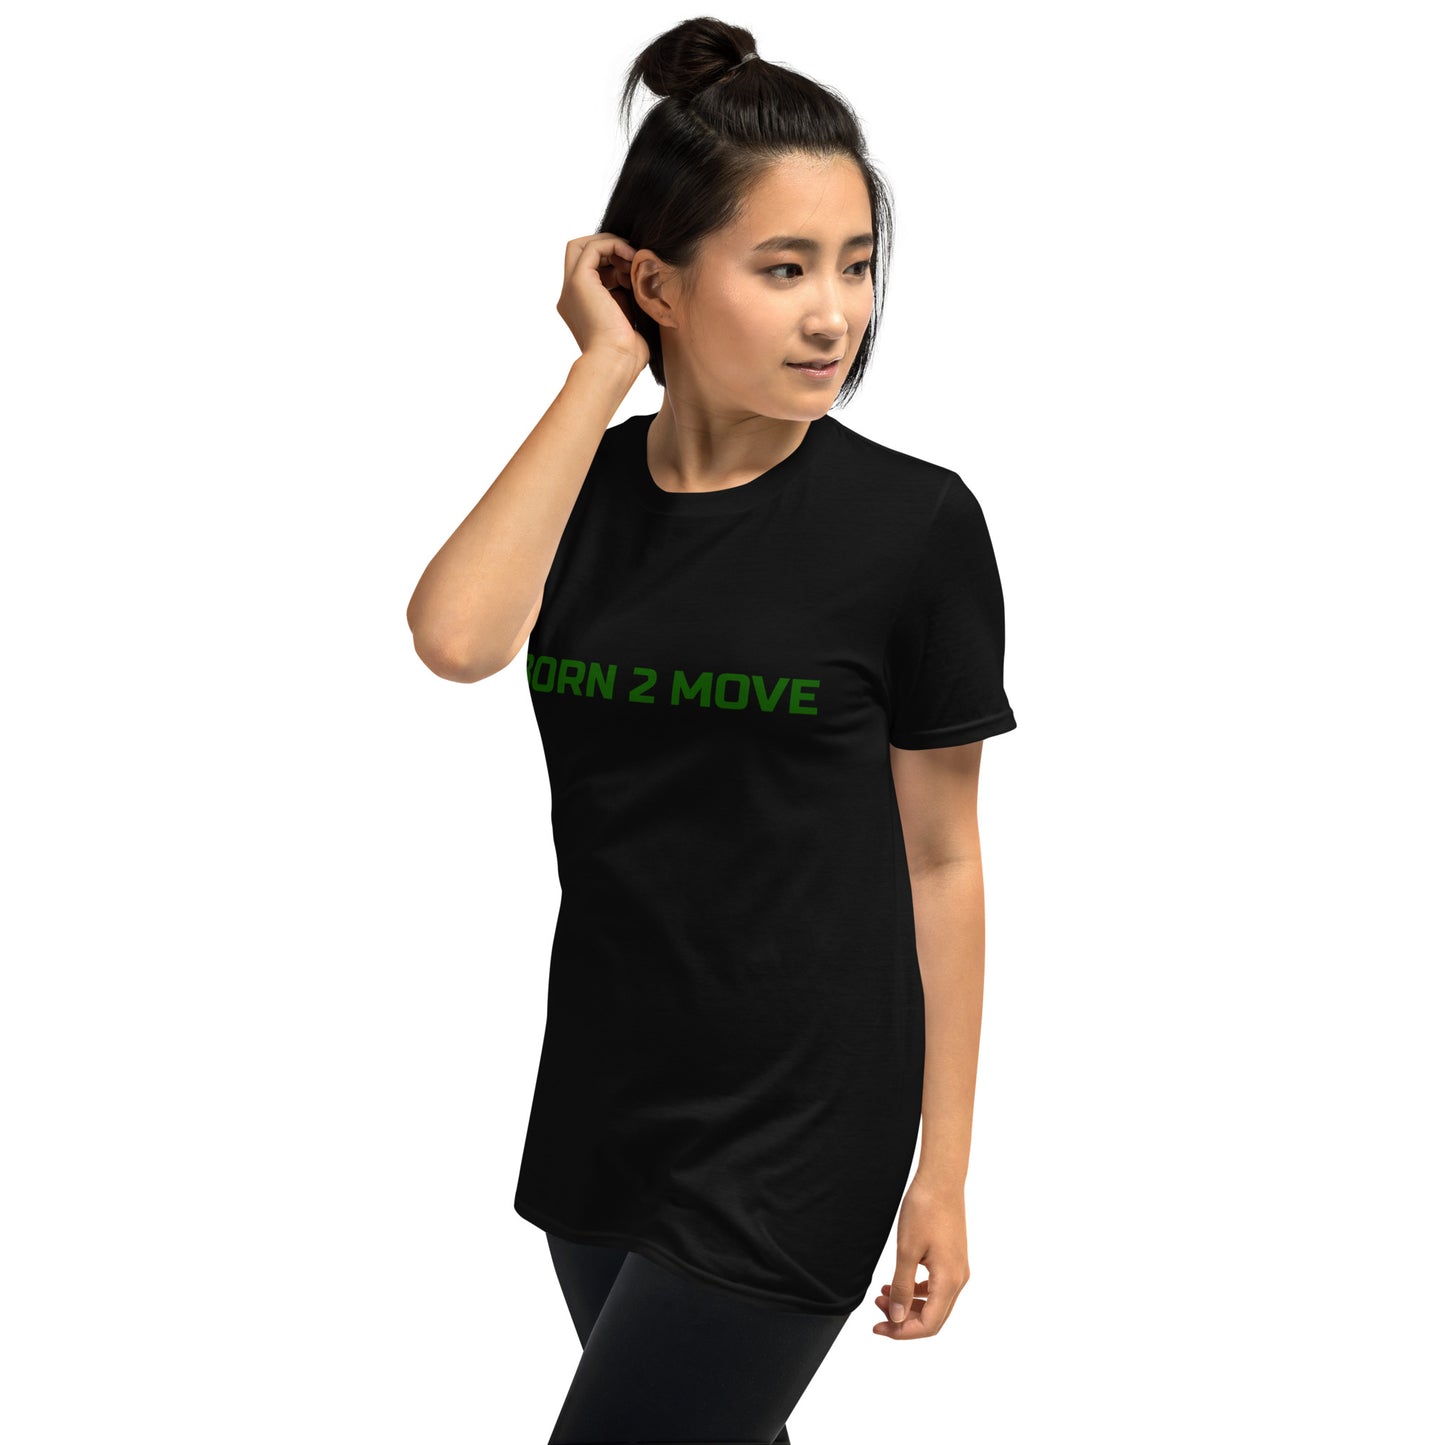 Gold" Born 2 Move" Softstyle t-shirt